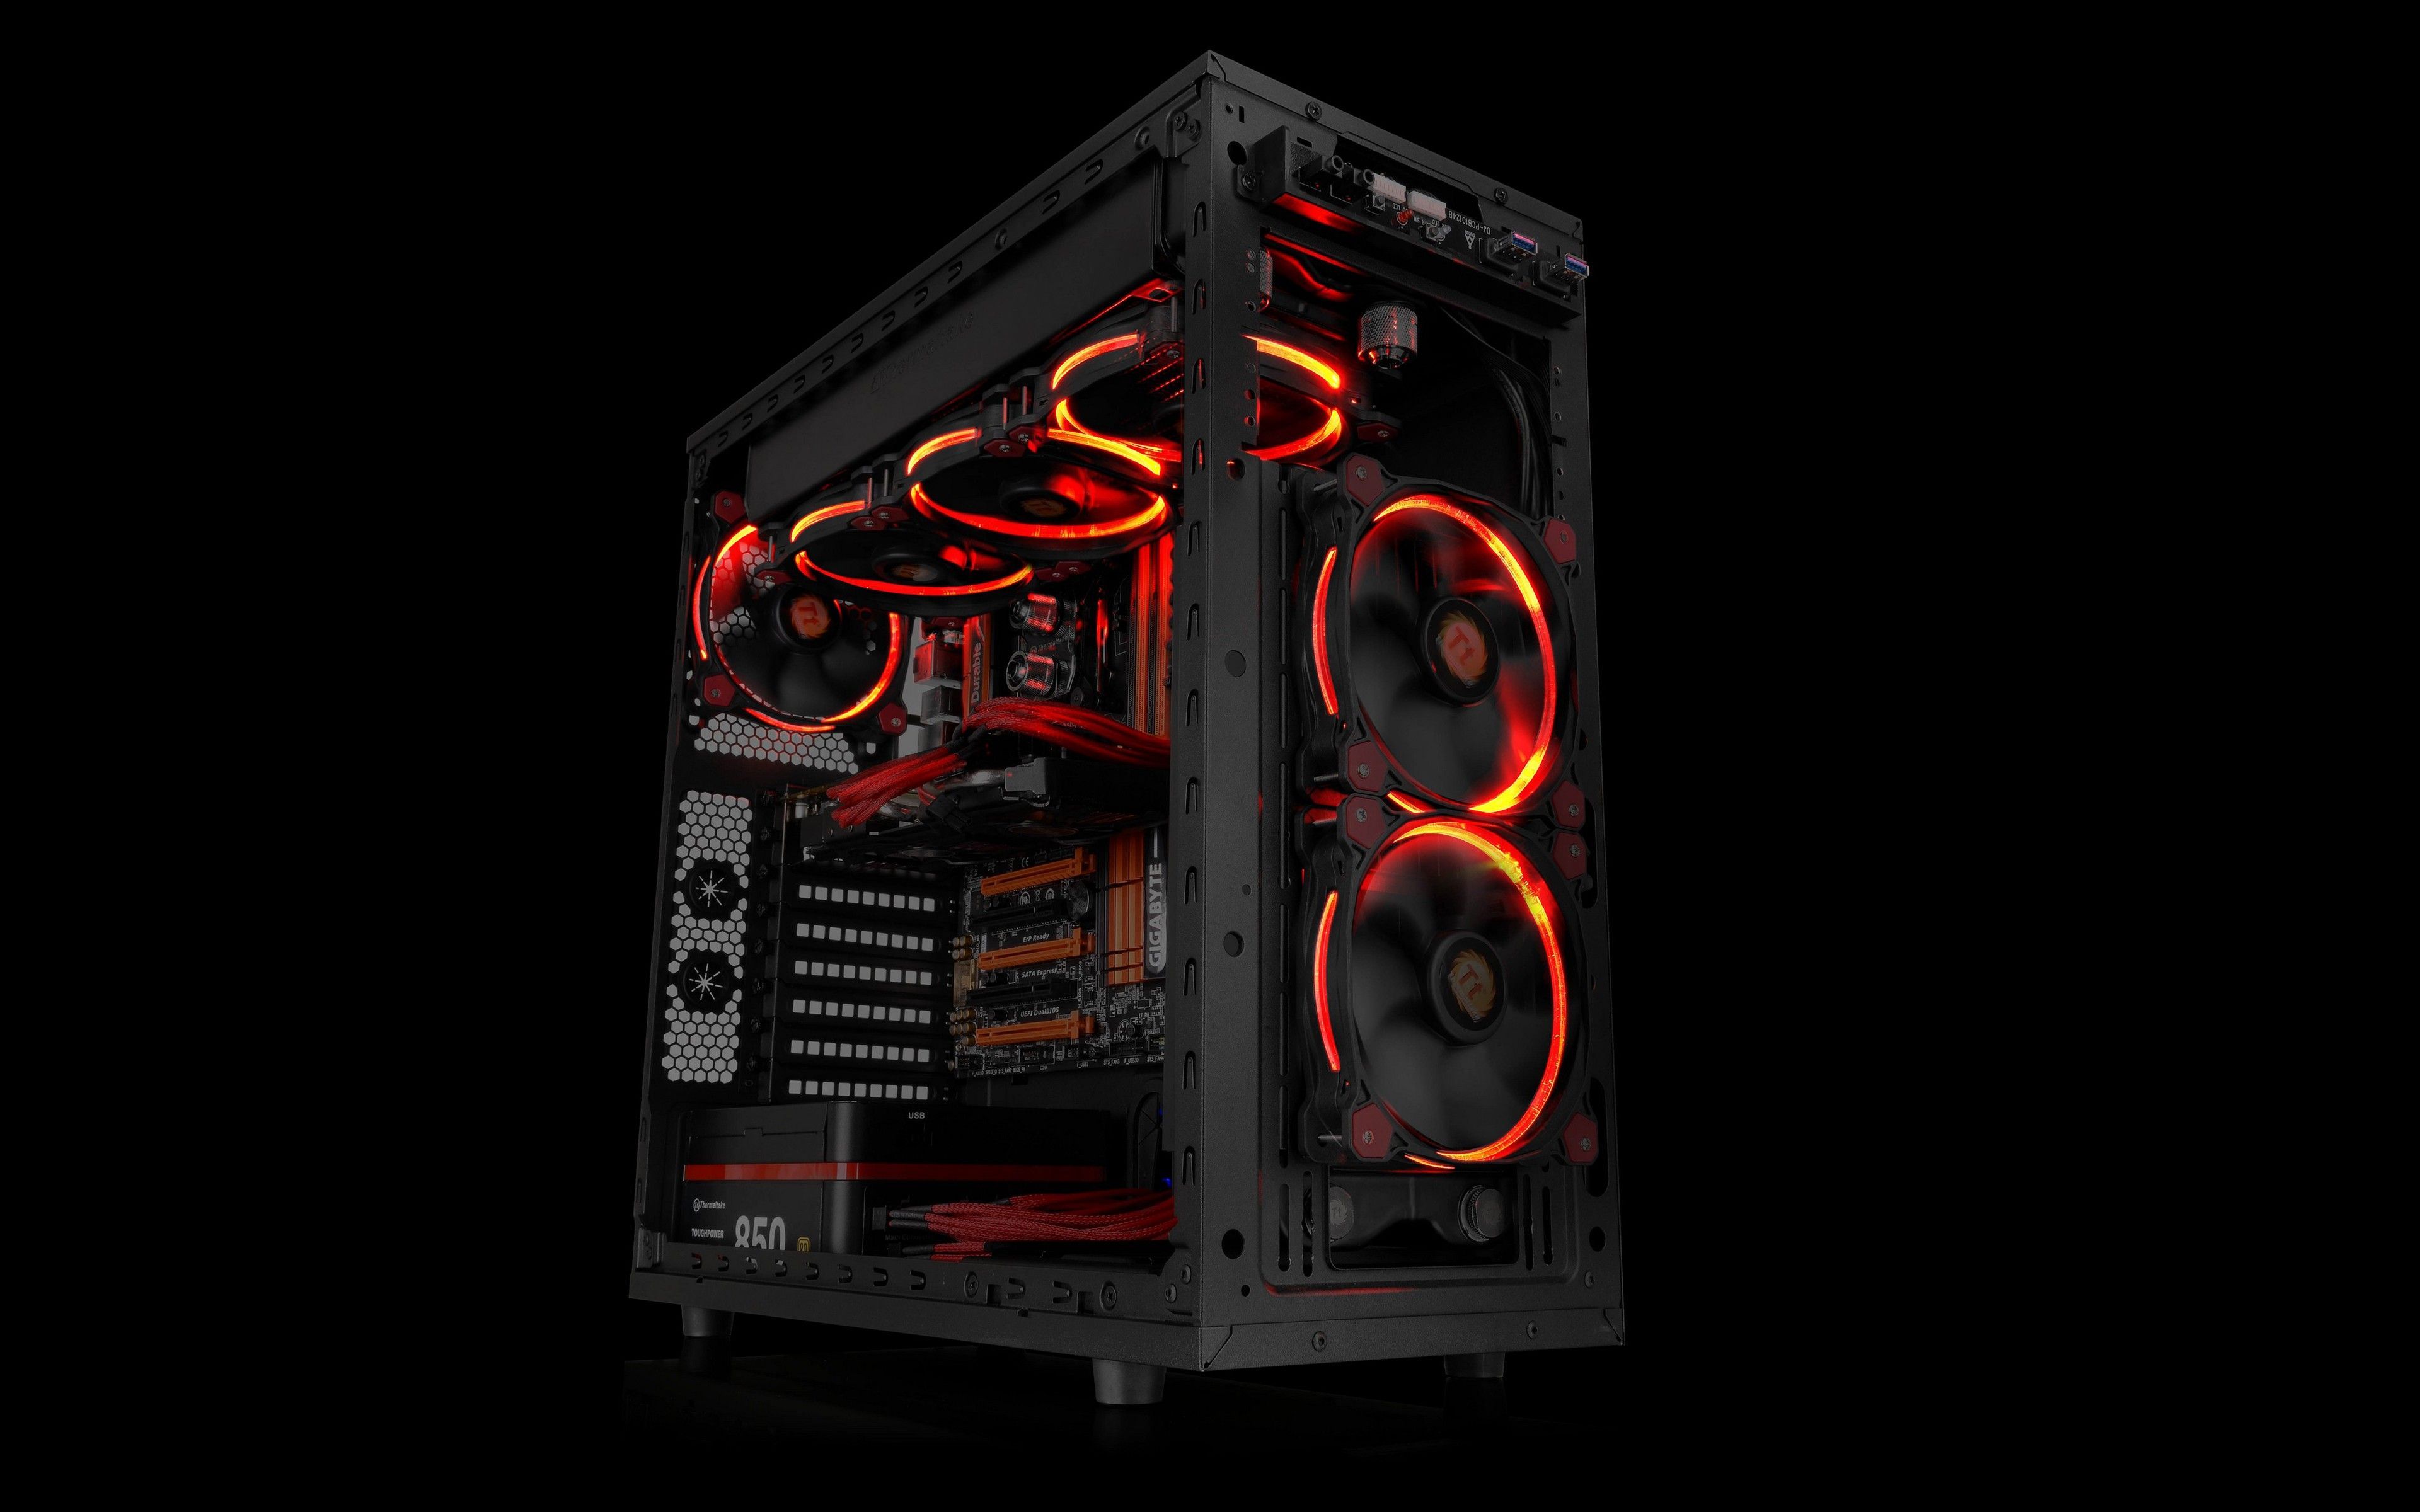 PC gaming, #computer, #PC cases, #technology, #Gigabyte, #hardware, #Thermaltake, #cooling fan, #simple background. Wallpap. Computer tower, Pc cases, Gaming pc